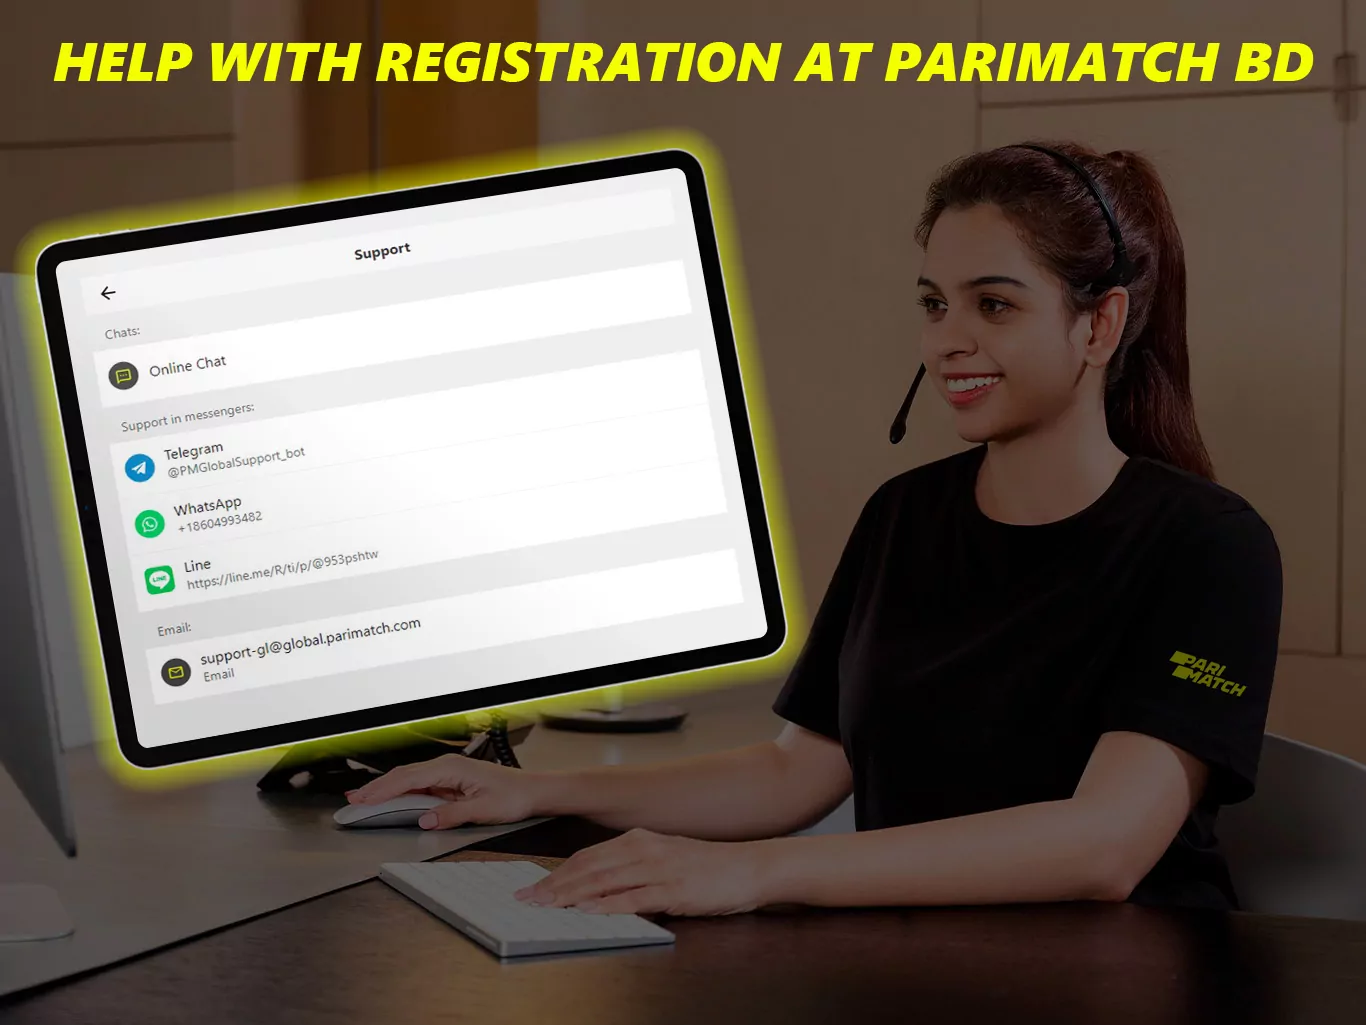 If you have any questions when registering in Parimatch, you can always contact technical support.